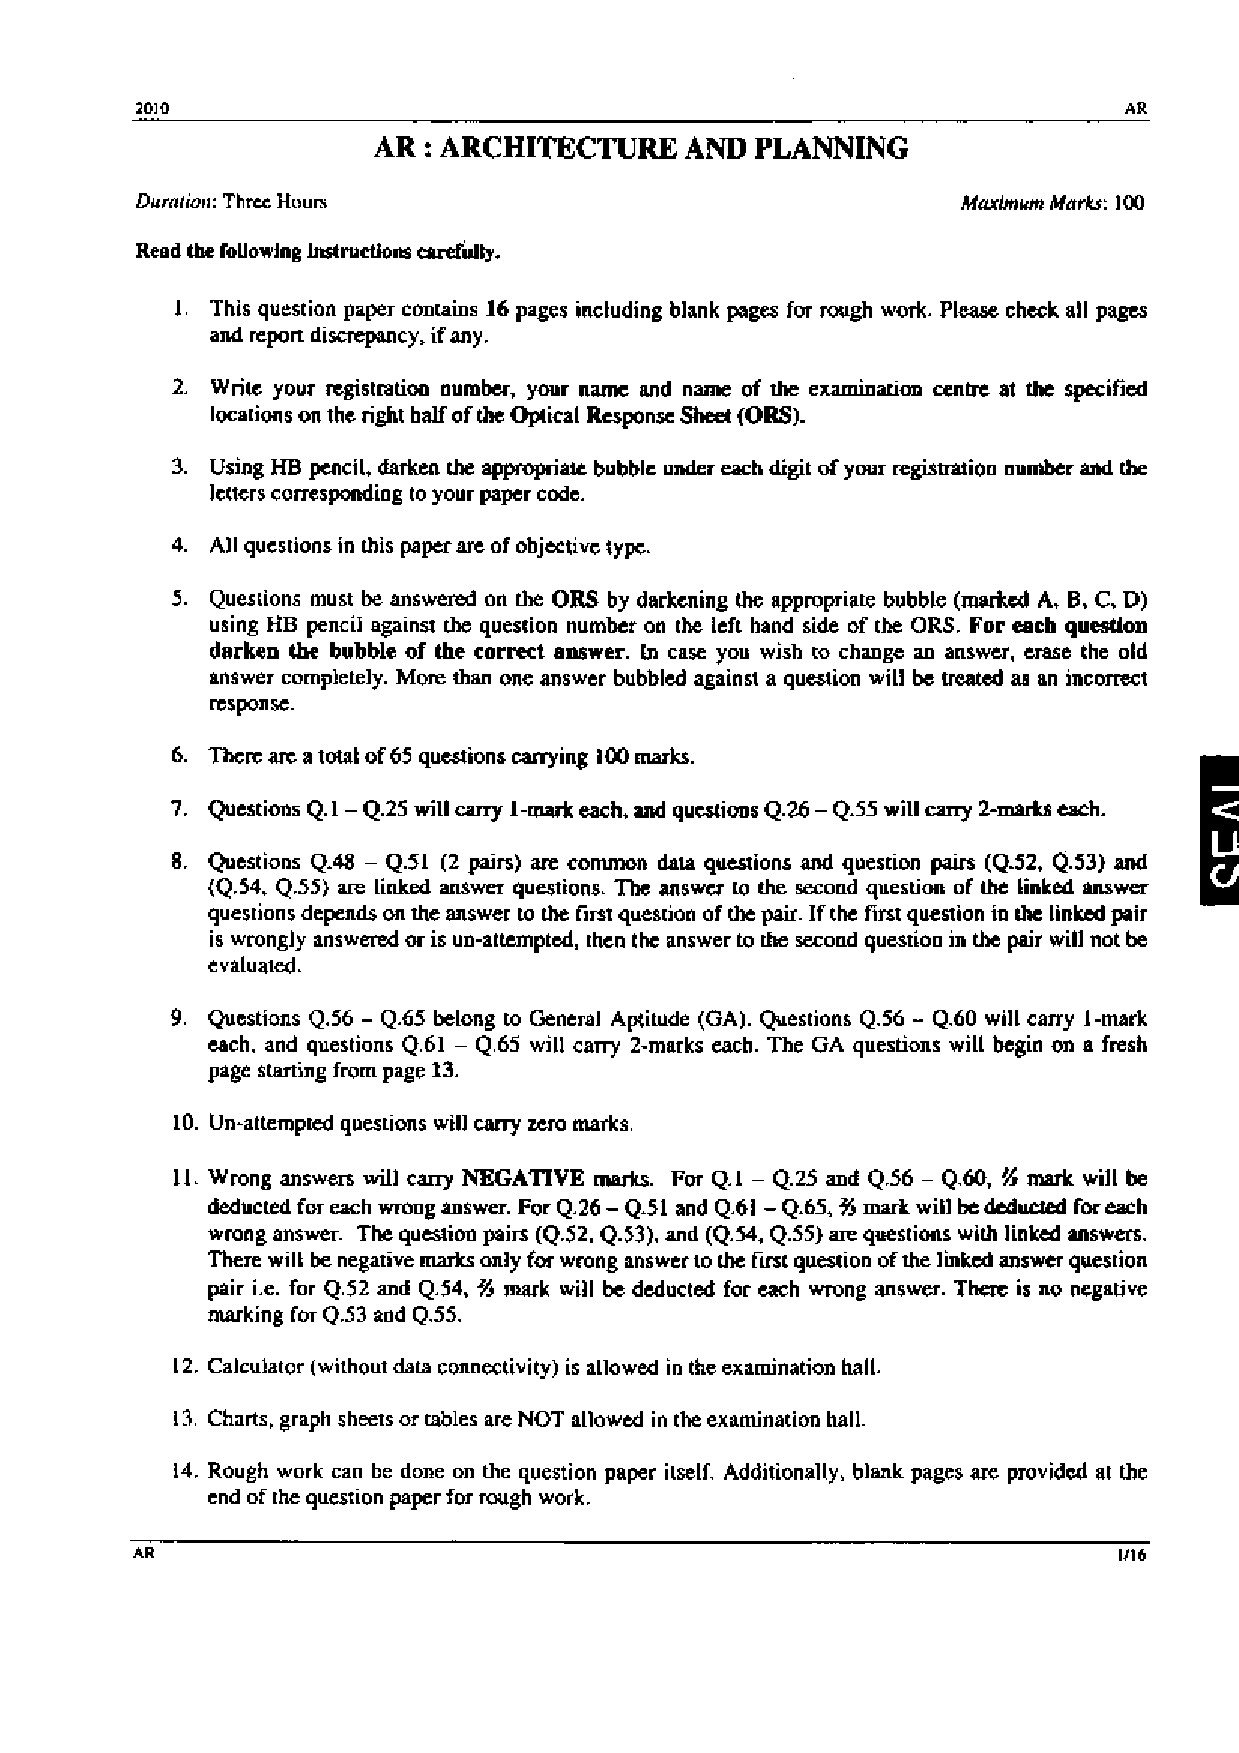 GATE Exam Question Paper 2010 Architecture and Planning 1